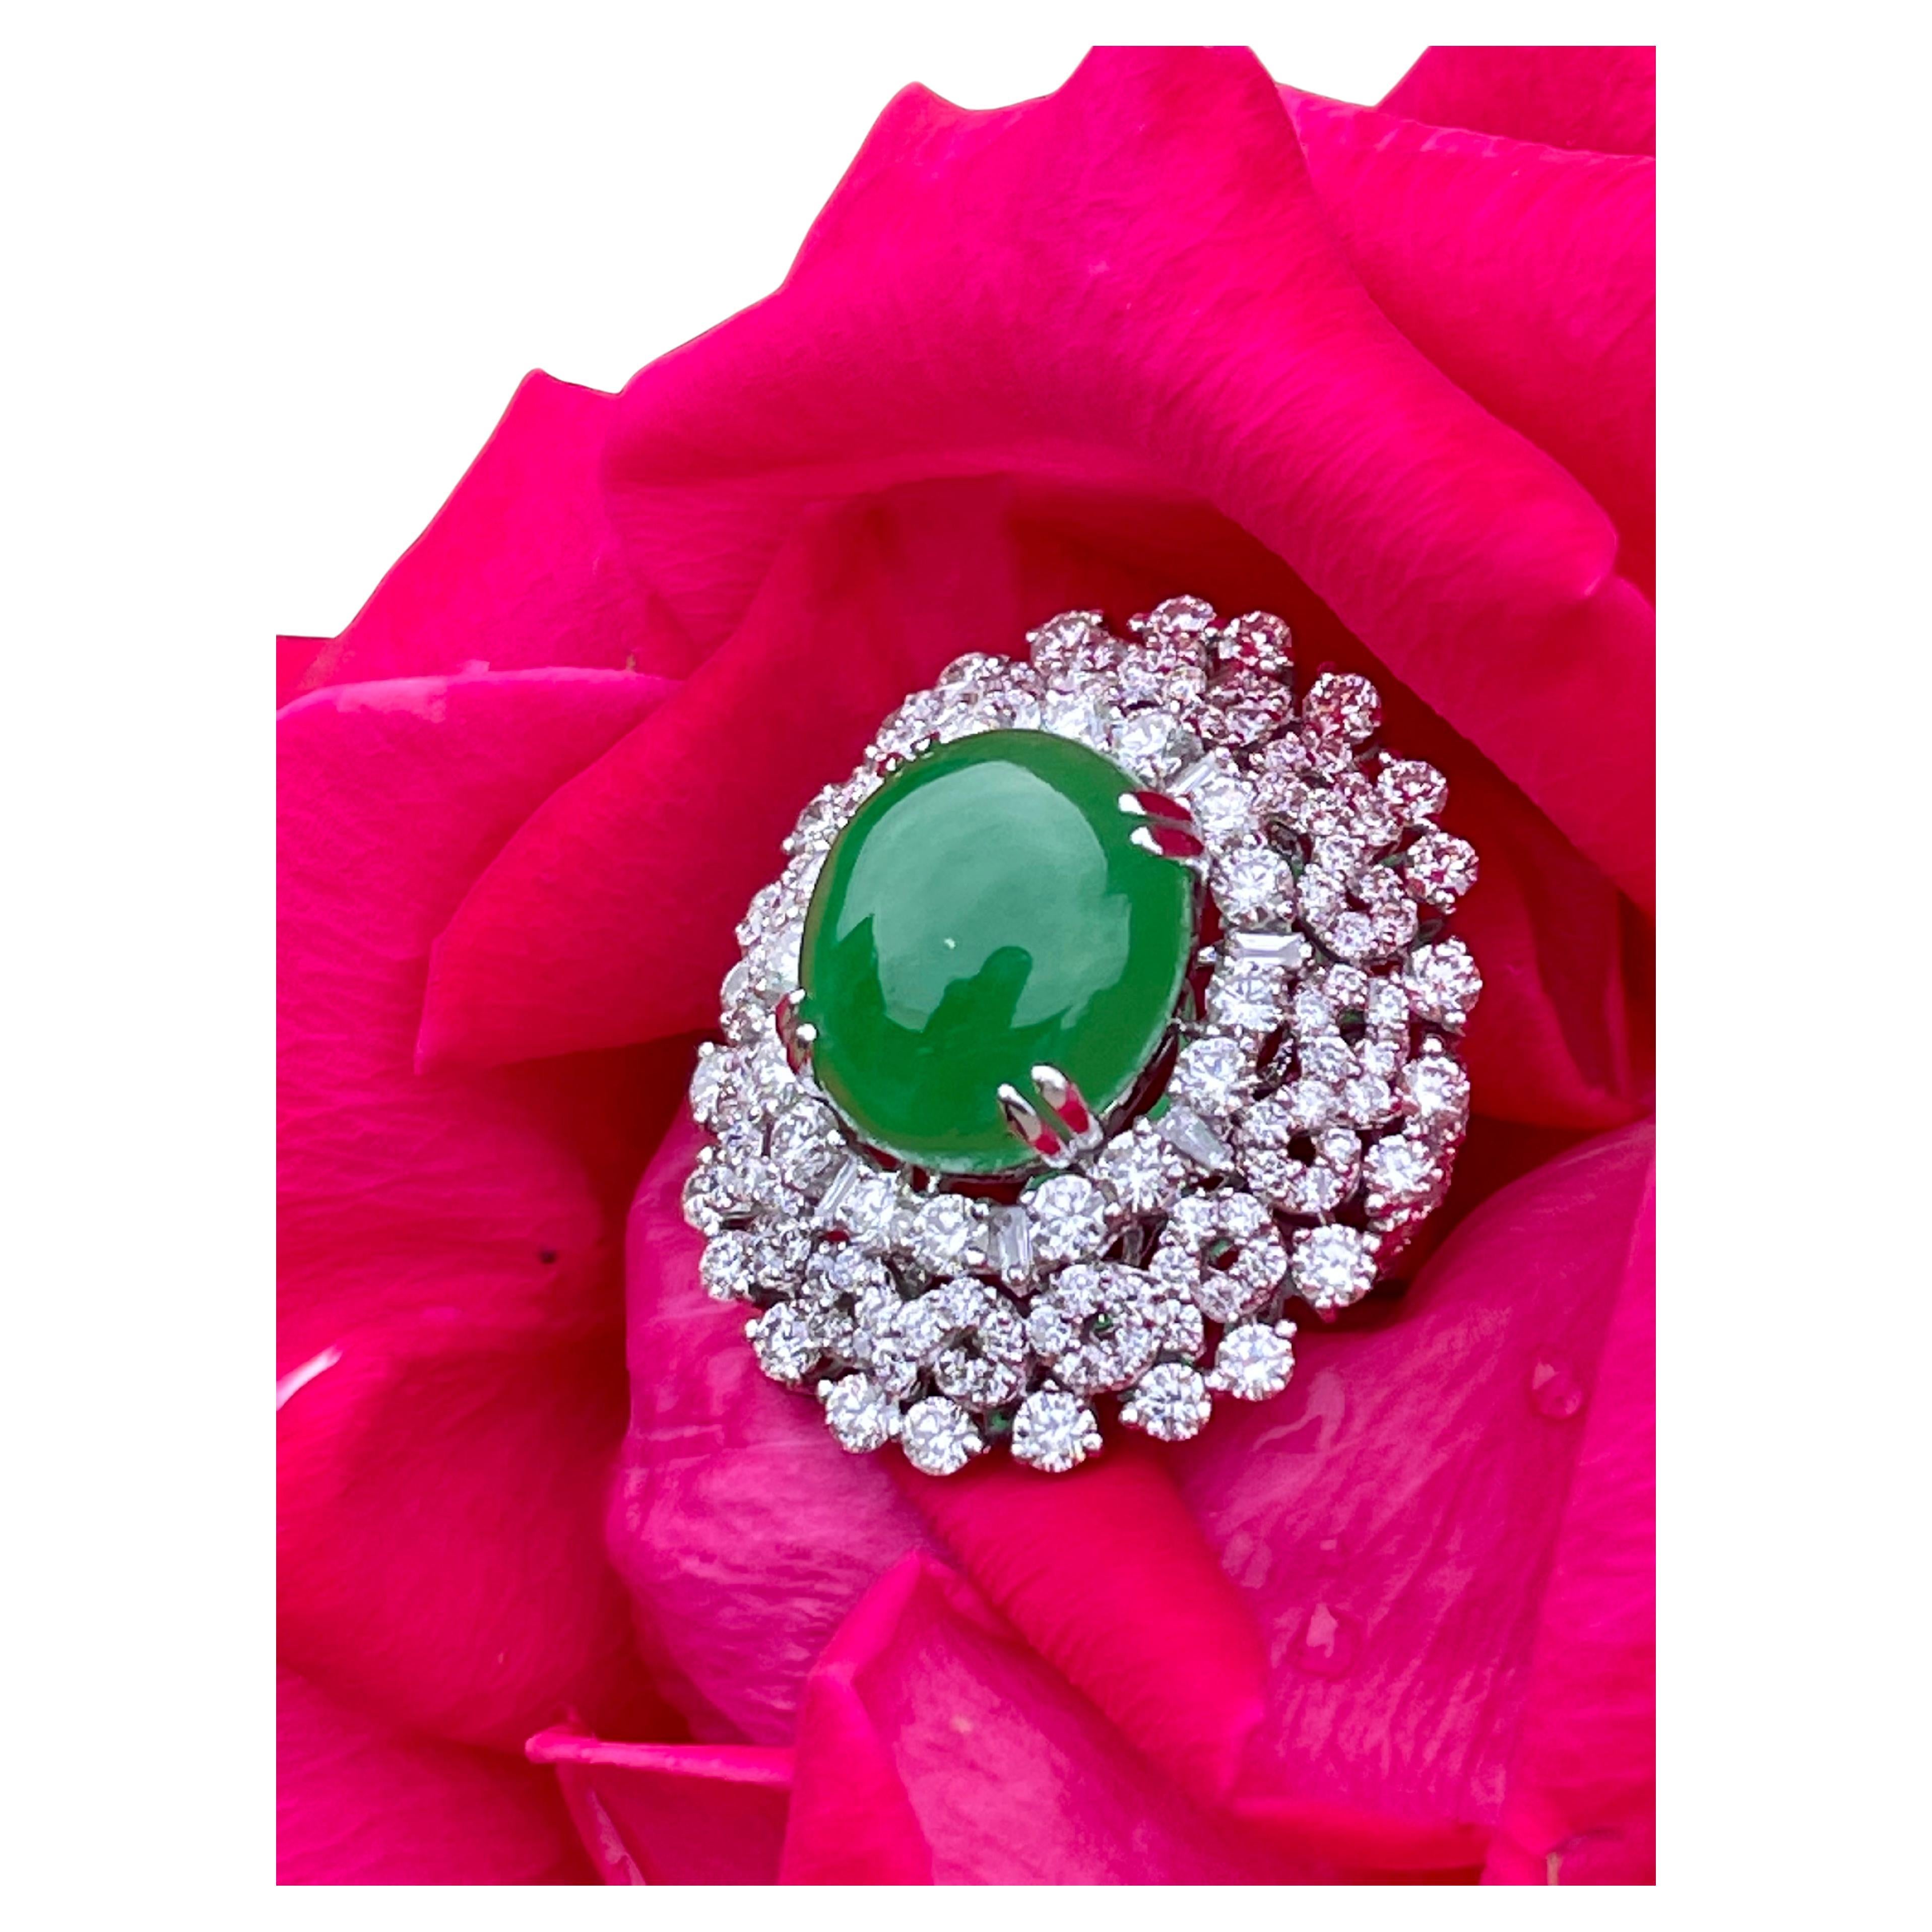 Magnificent and totally dazzling, 18 karat white gold large estate jade and diamond cocktail ring features a beautiful 12.30 carat green jade cabochon stone in the center, surrounded by a sparkling triple halo of round and circular pattern prong set